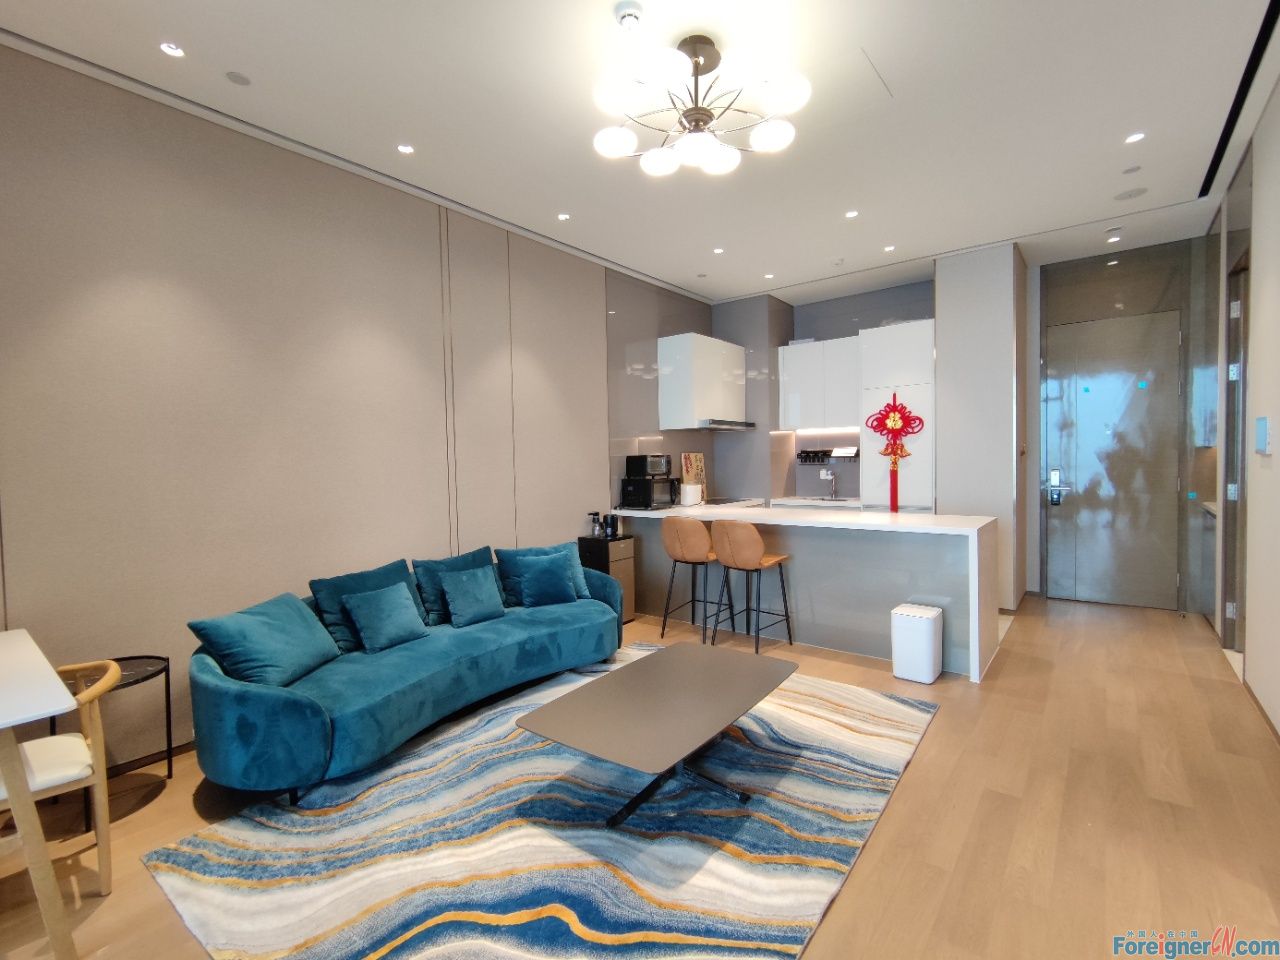 High-End！！IFS Sky Residence Apartment in SIP/1 bedroom and 2 bathrooms/Central AC,Floor heating,bathtub/Modern style/close Jinji Lake,Times Square,Shopping Malls